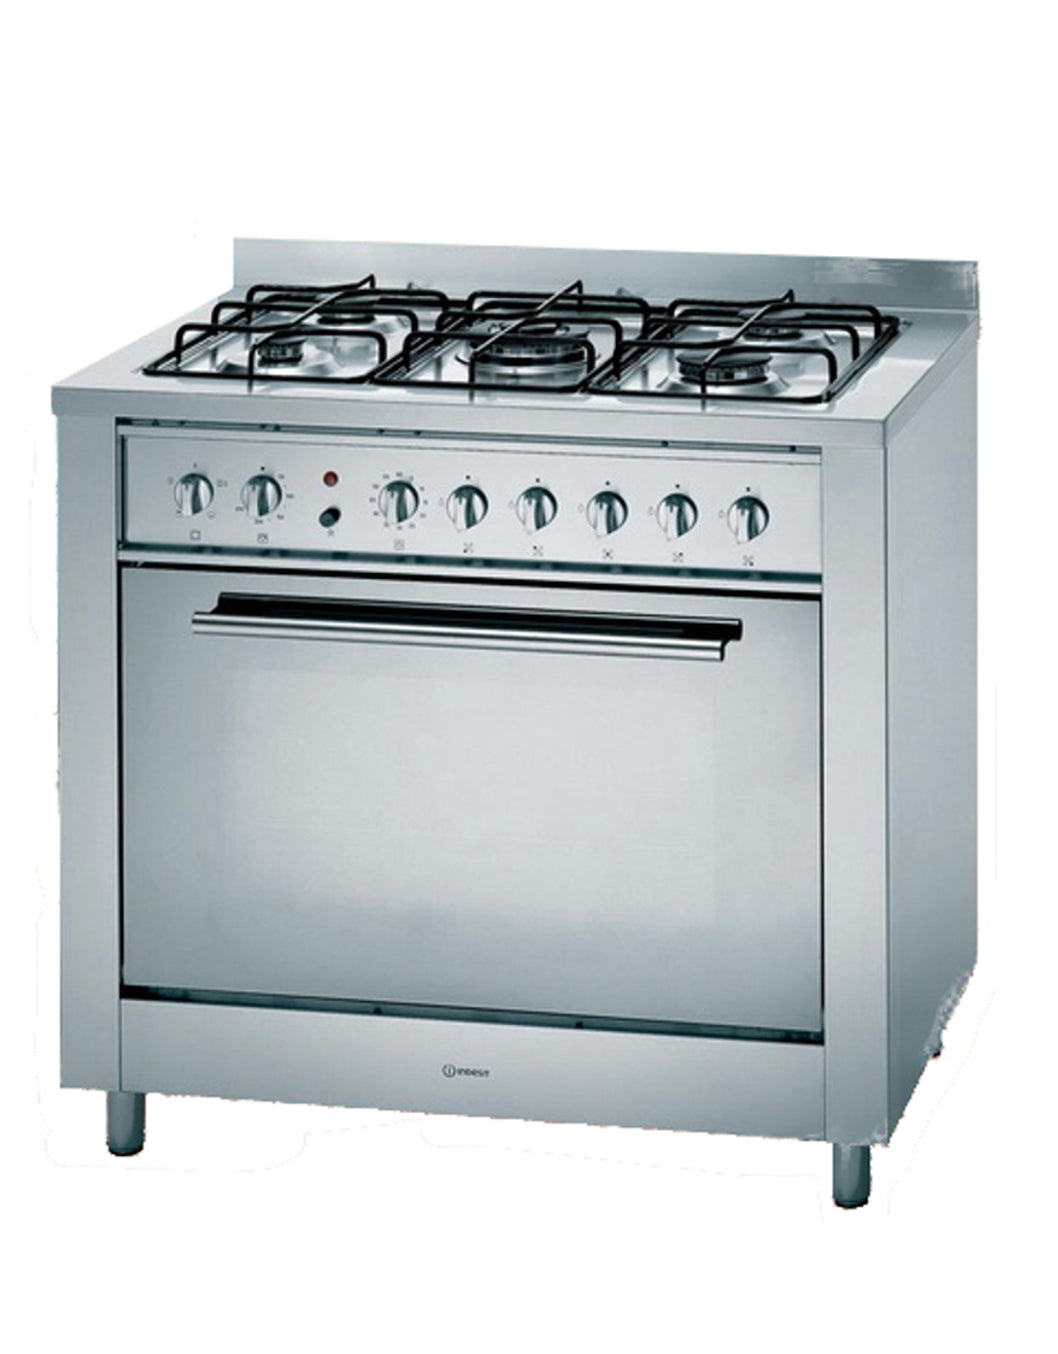 Indesit 90cm,  Gas Burners + Electric Oven Free Standing Cooker I5GG1G X EX